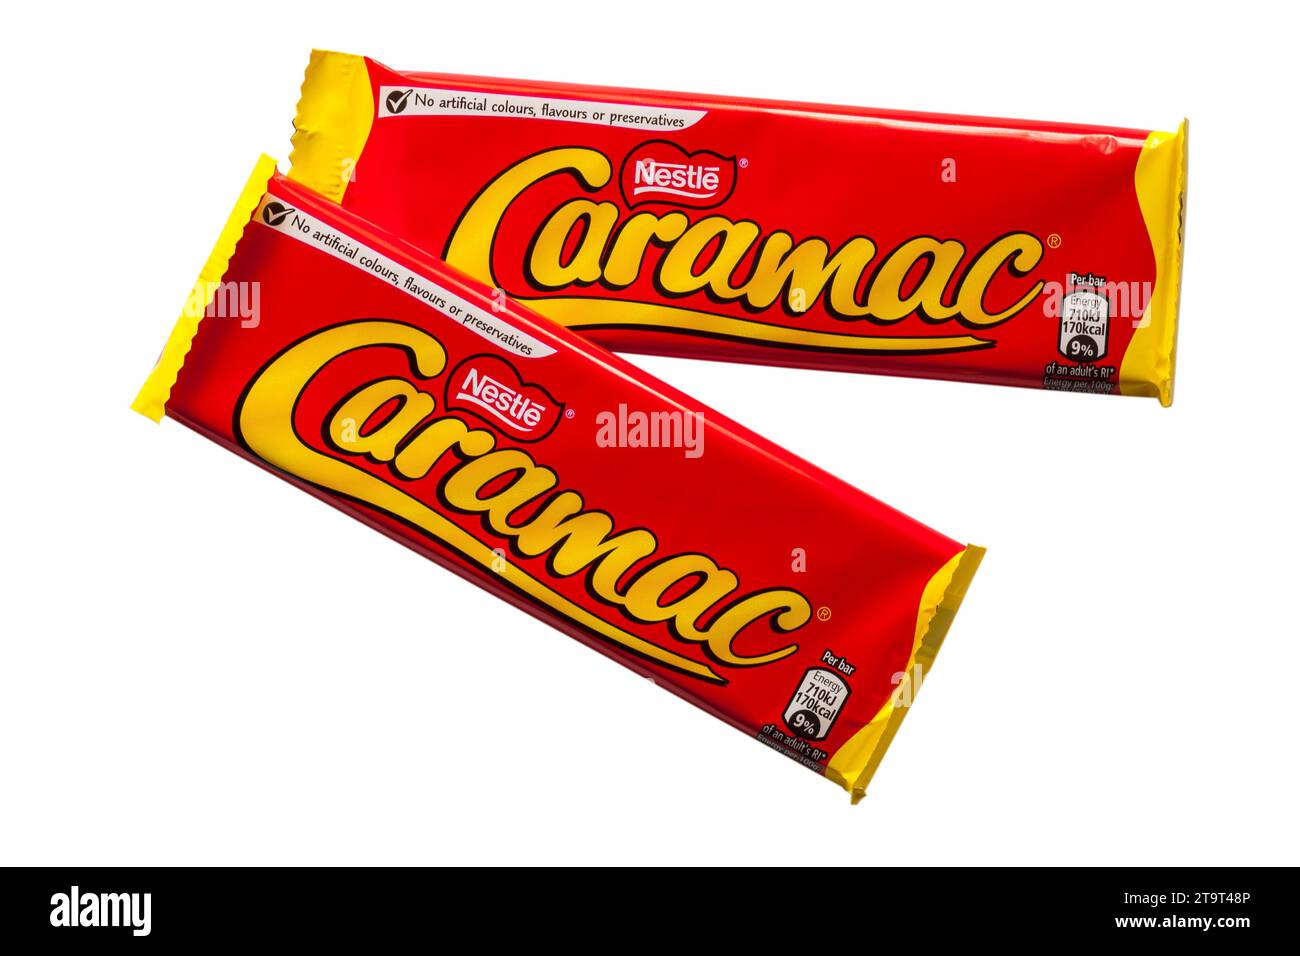 2 two bars of Nestle Caramac chocolate isolated on white background - looking down on from above - The Caramel Flavour bar Stock Photo